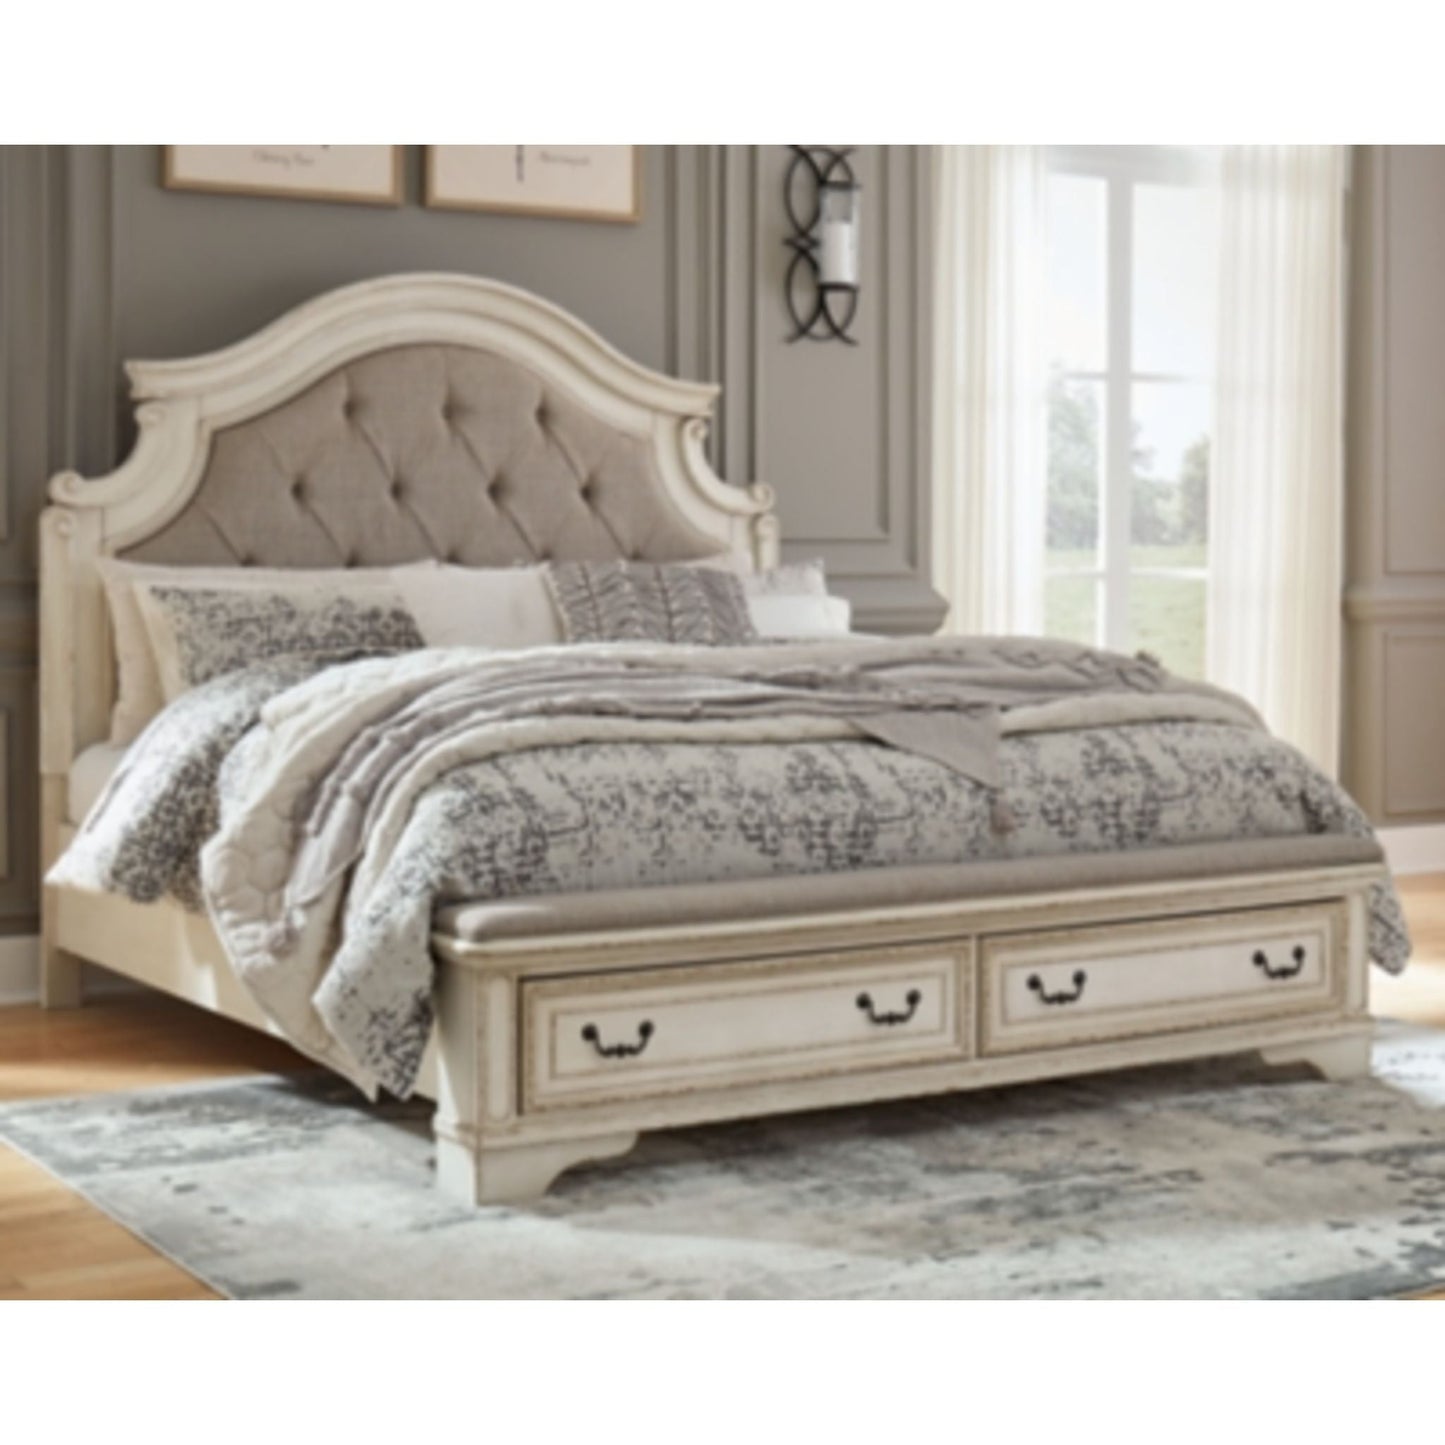 Realyn King Bed - Two-tone